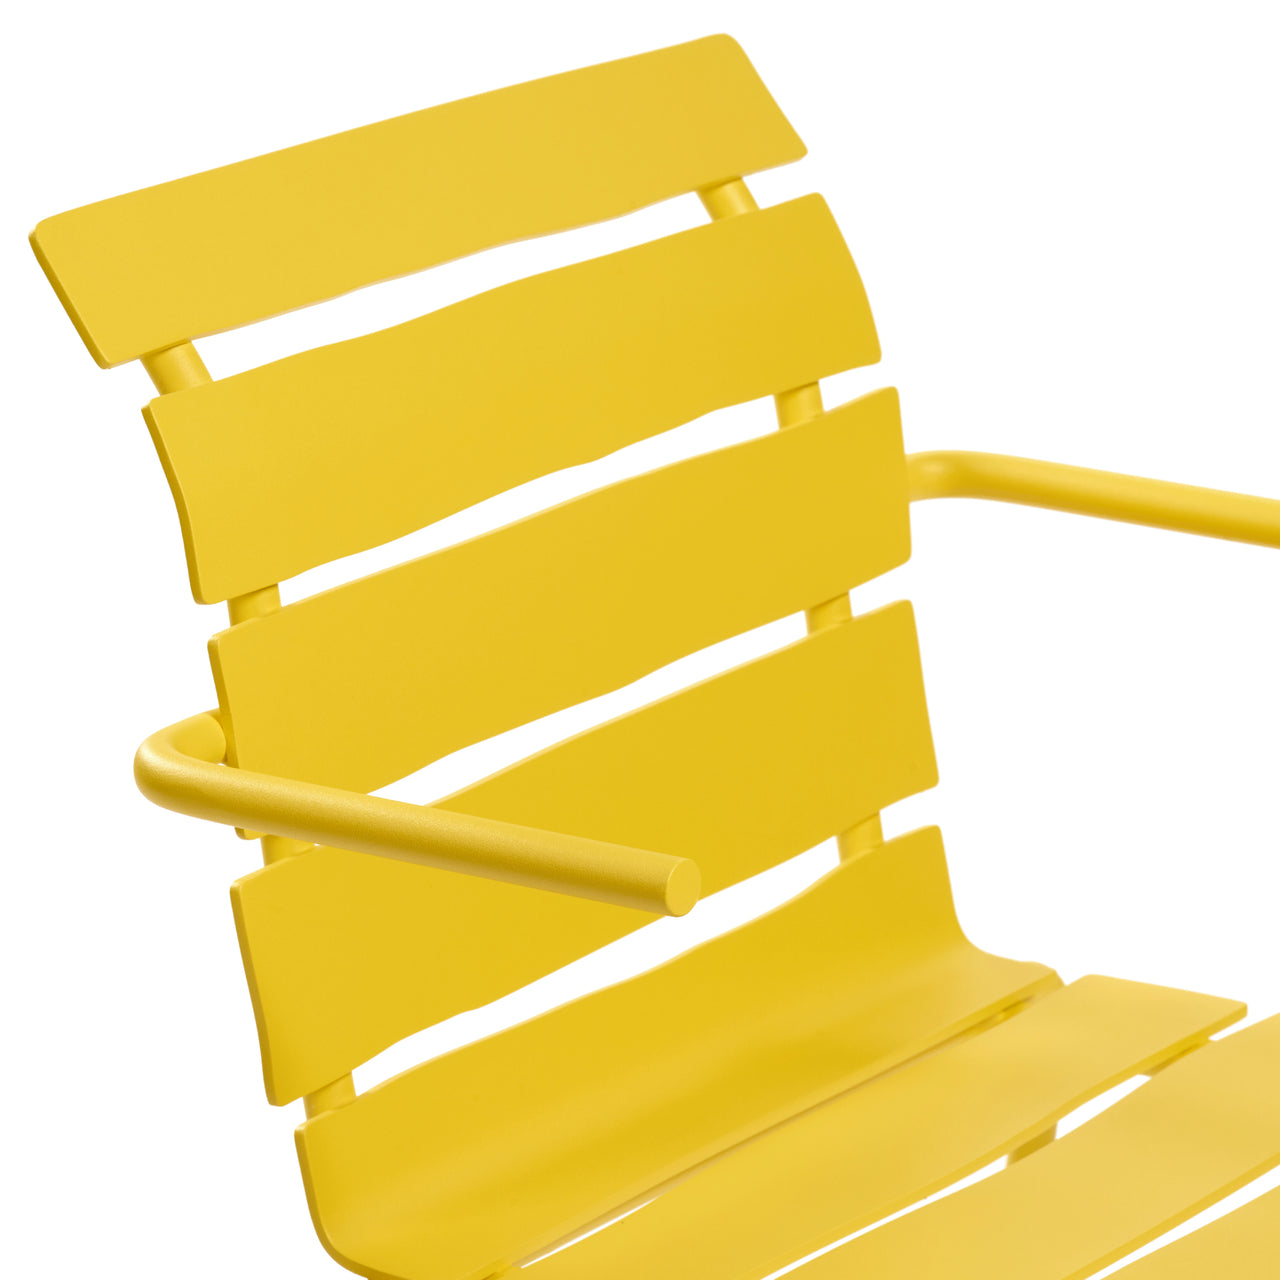 Aligned Outdoor Stacking Chair